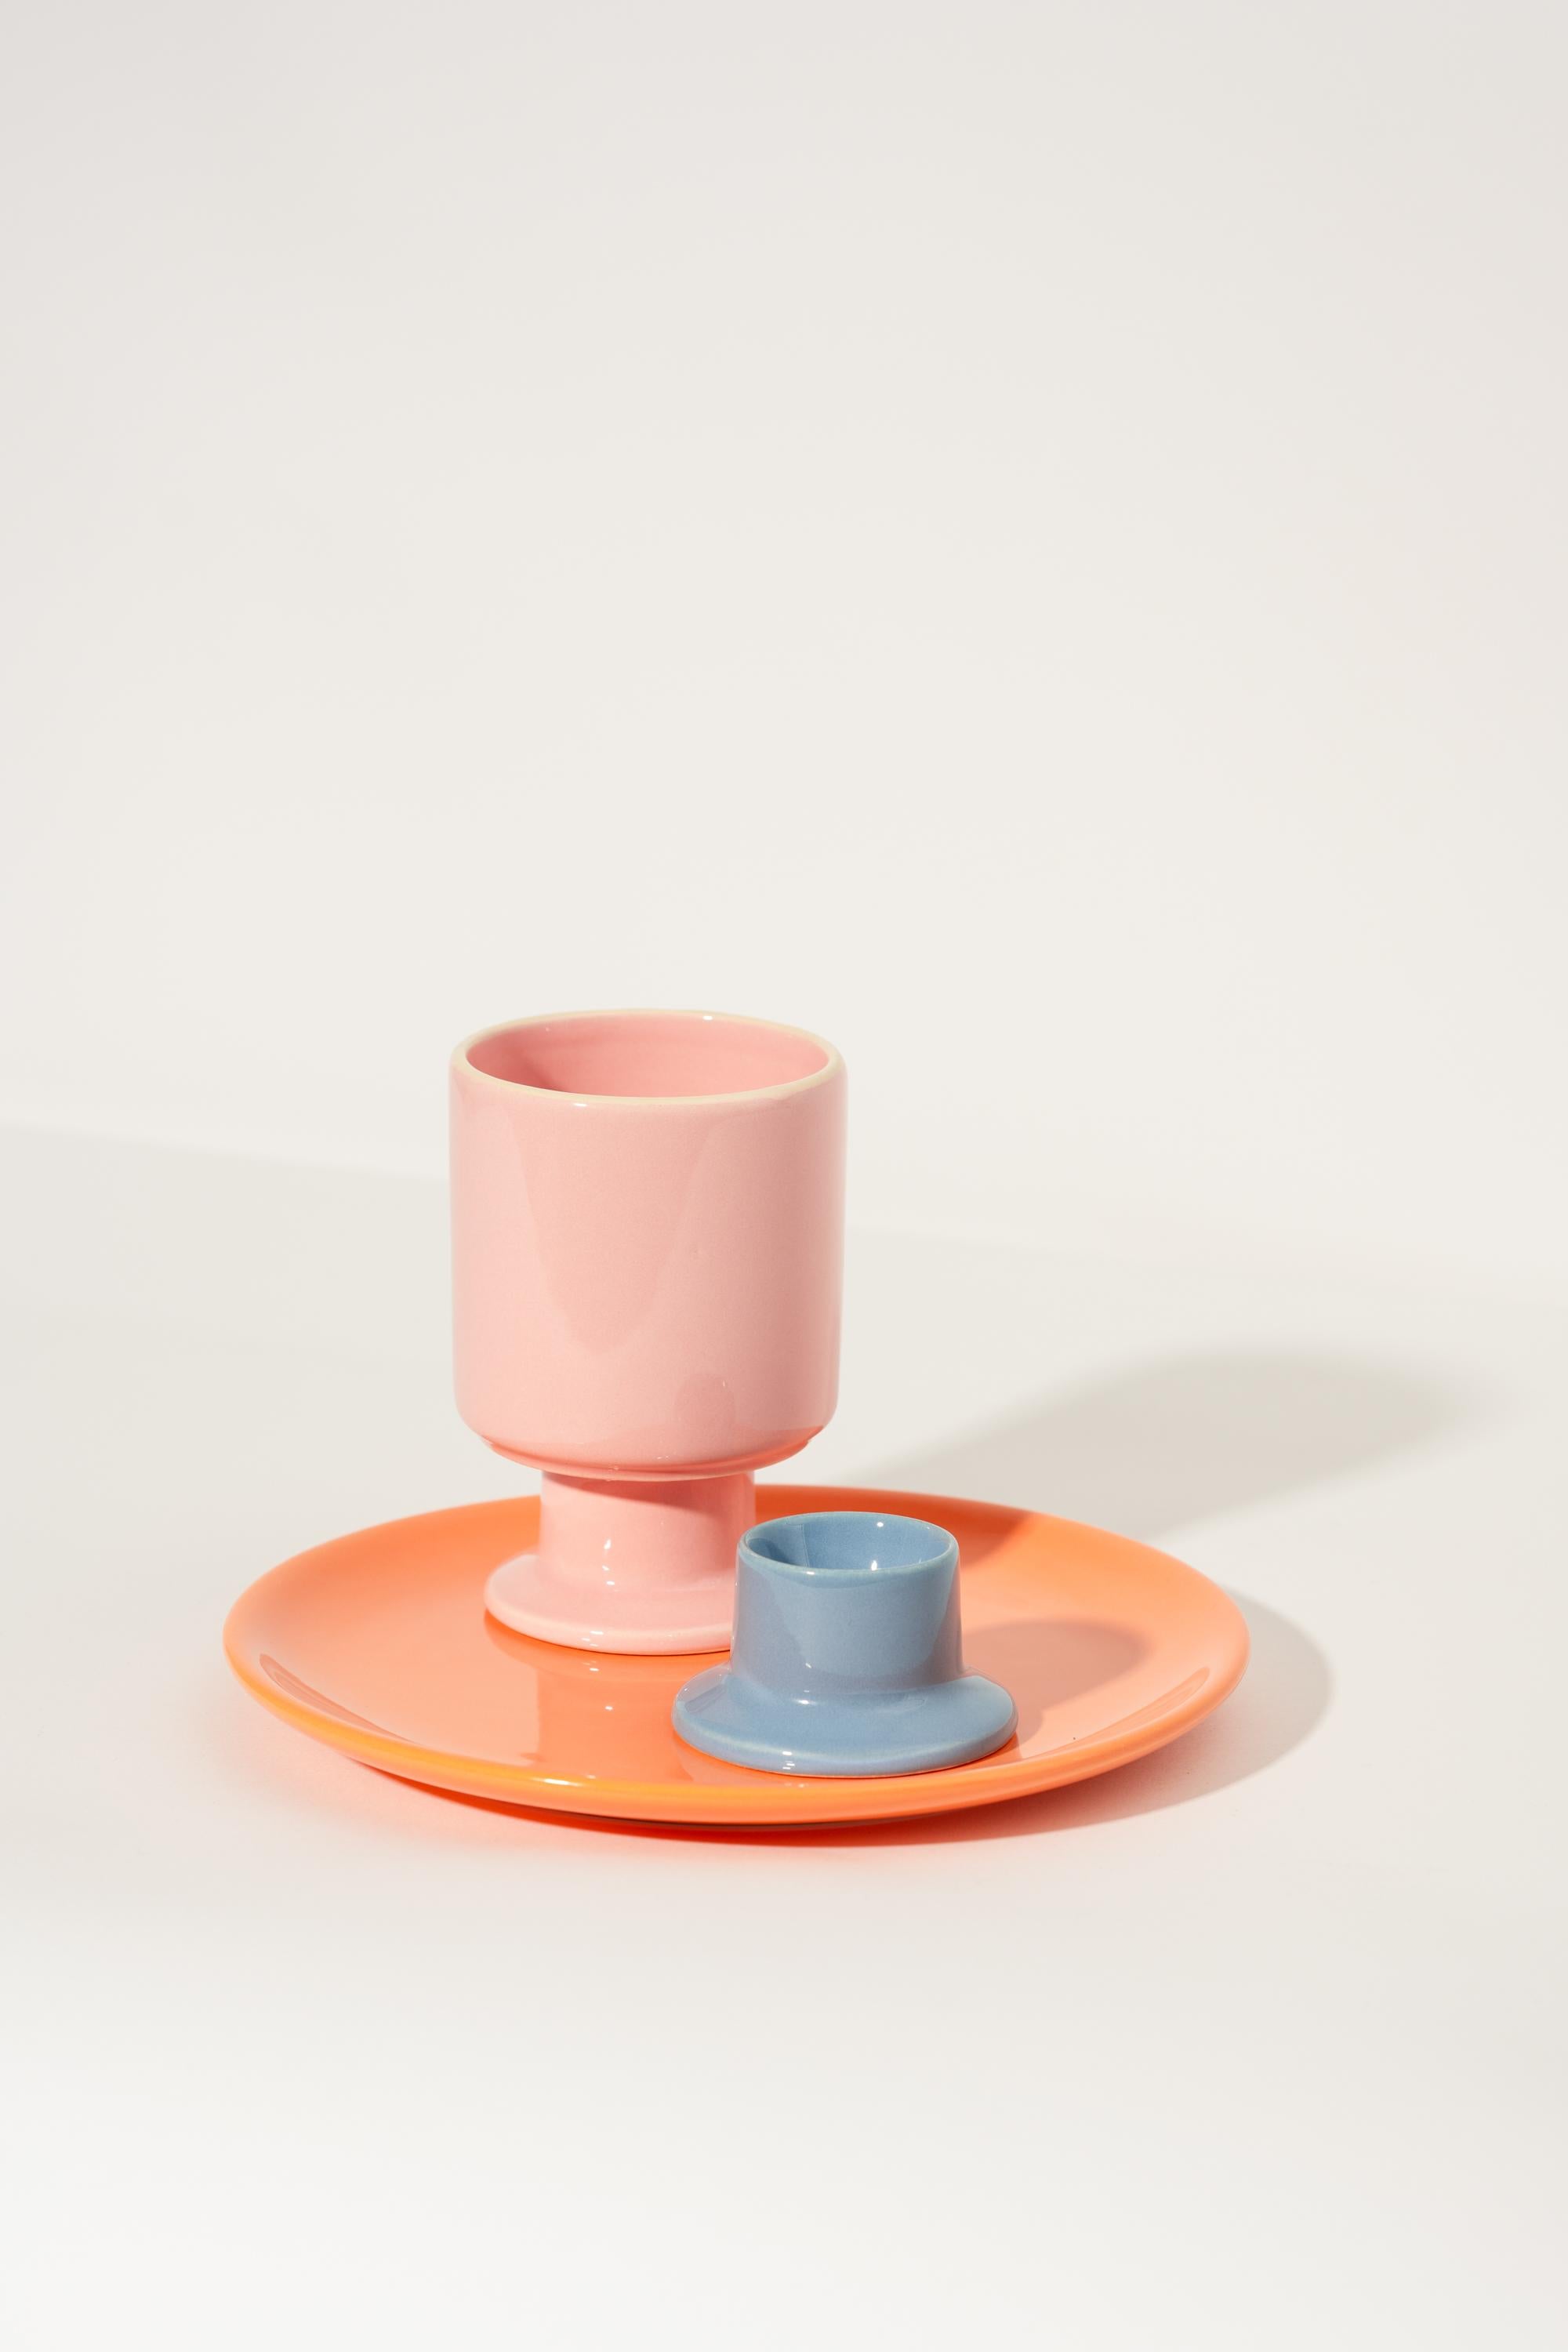 Perfect breakfast set; Orange plate, Candy pink WIT mug and Denim blue egg holder JULA by Malwina Konopacka. 

A breakfast set is the perfect companion for every morning. The original colors and shapes of the objects will put you in a joyful mood